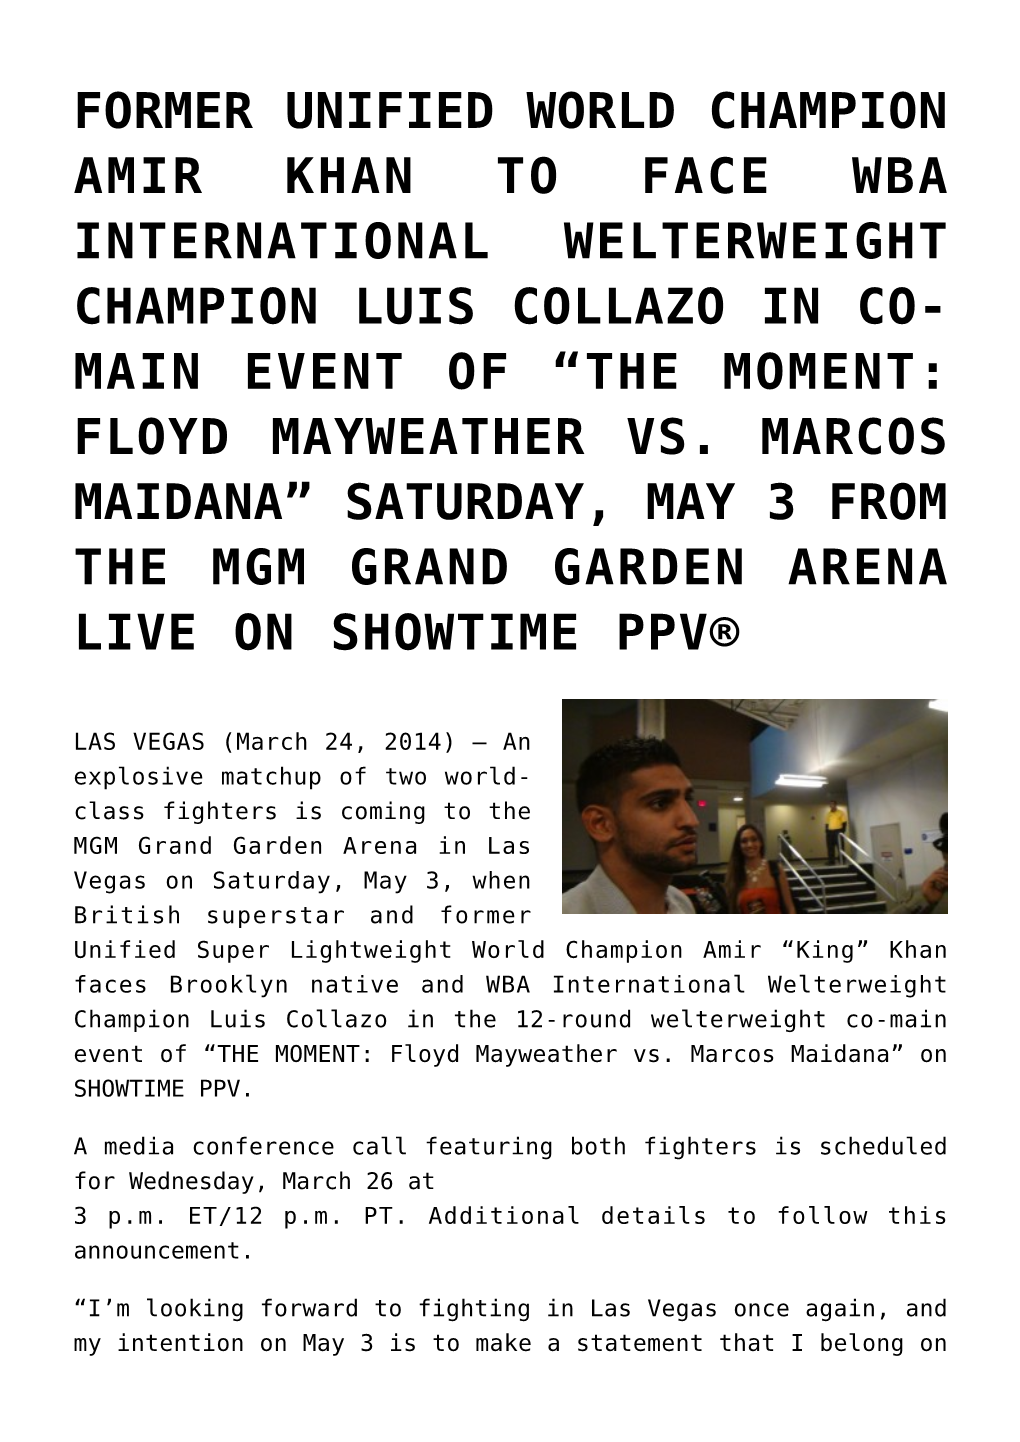 Former Unified World Champion Amir Khan to Face Wba International Welterweight Champion Luis Collazo in Co- Main Event of “The Moment: Floyd Mayweather Vs